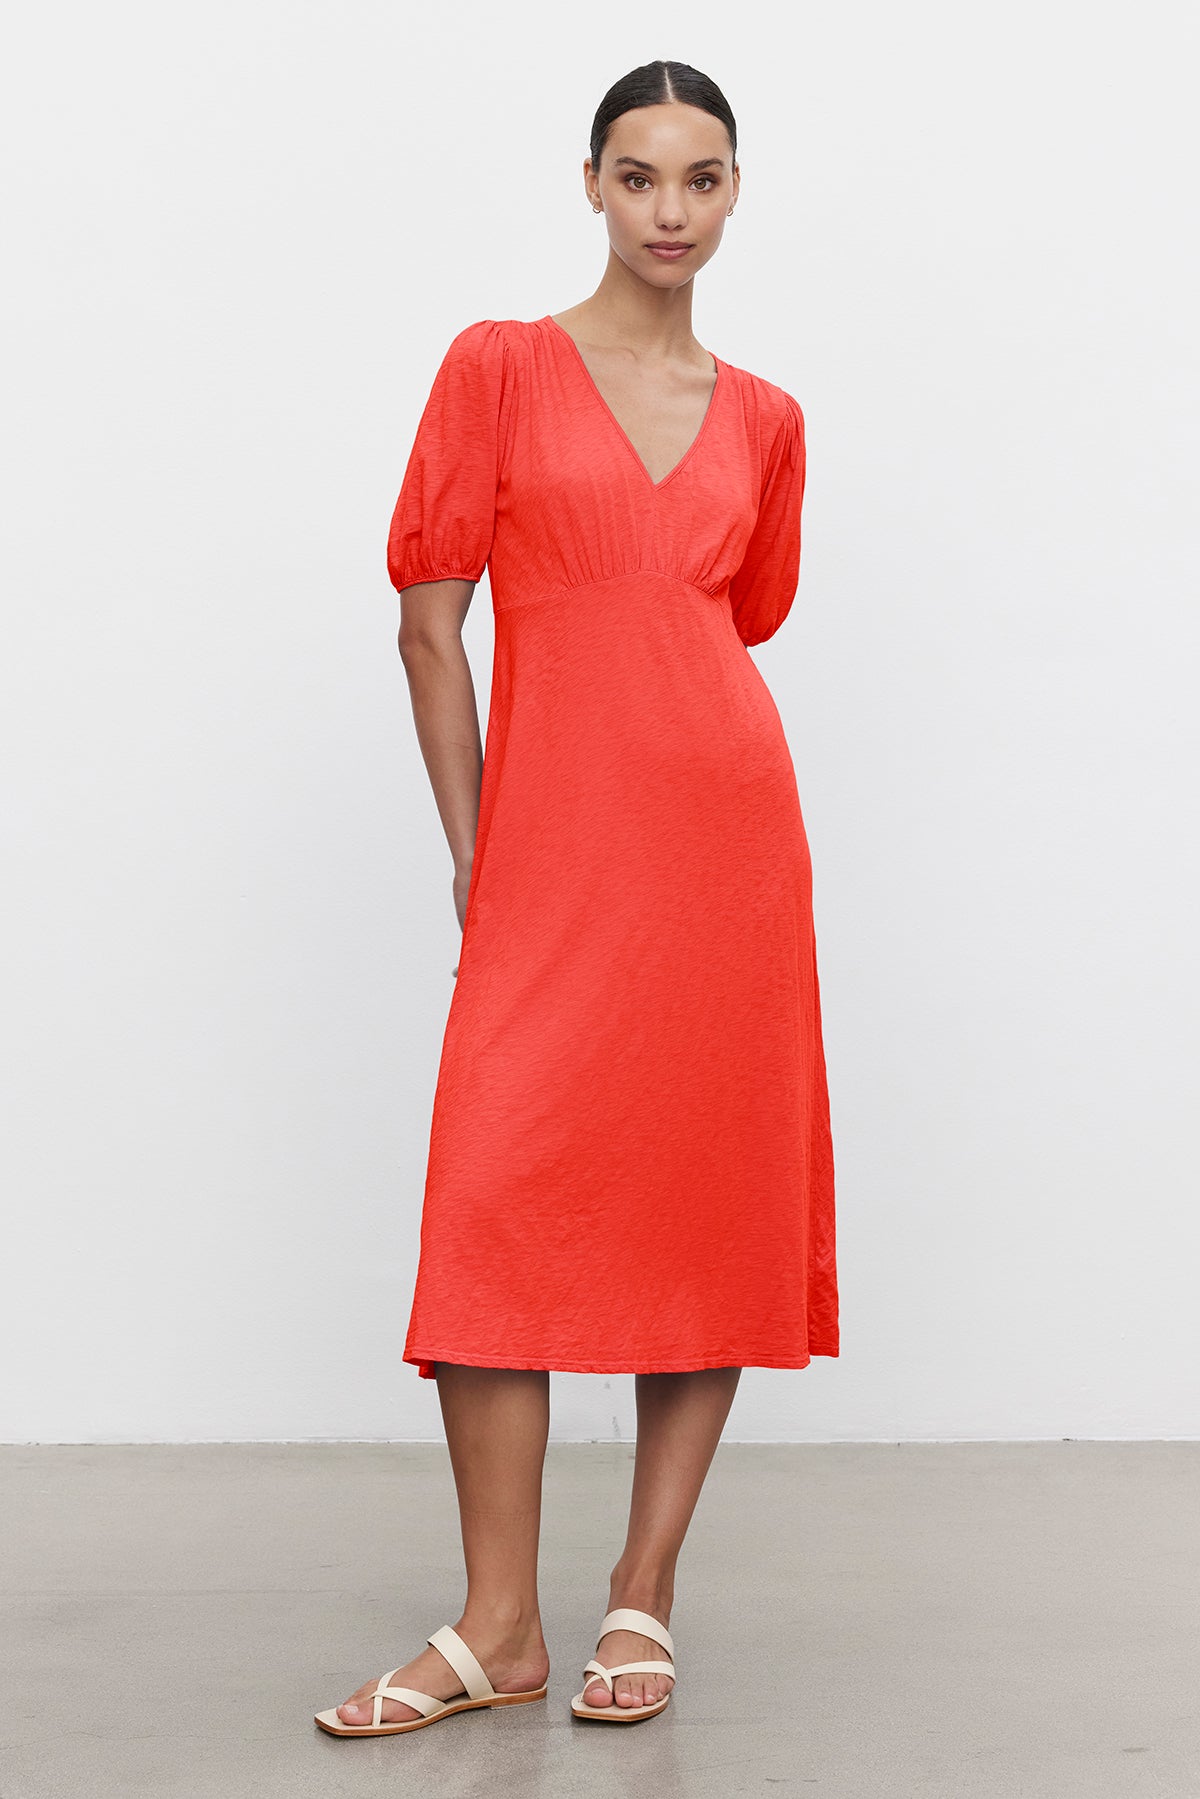 A person stands against a plain background wearing a bright orange PARKER COTTON SLUB MIDI DRESS by Velvet by Graham & Spencer with short puffed sleeves and white sandals.-37185421770945